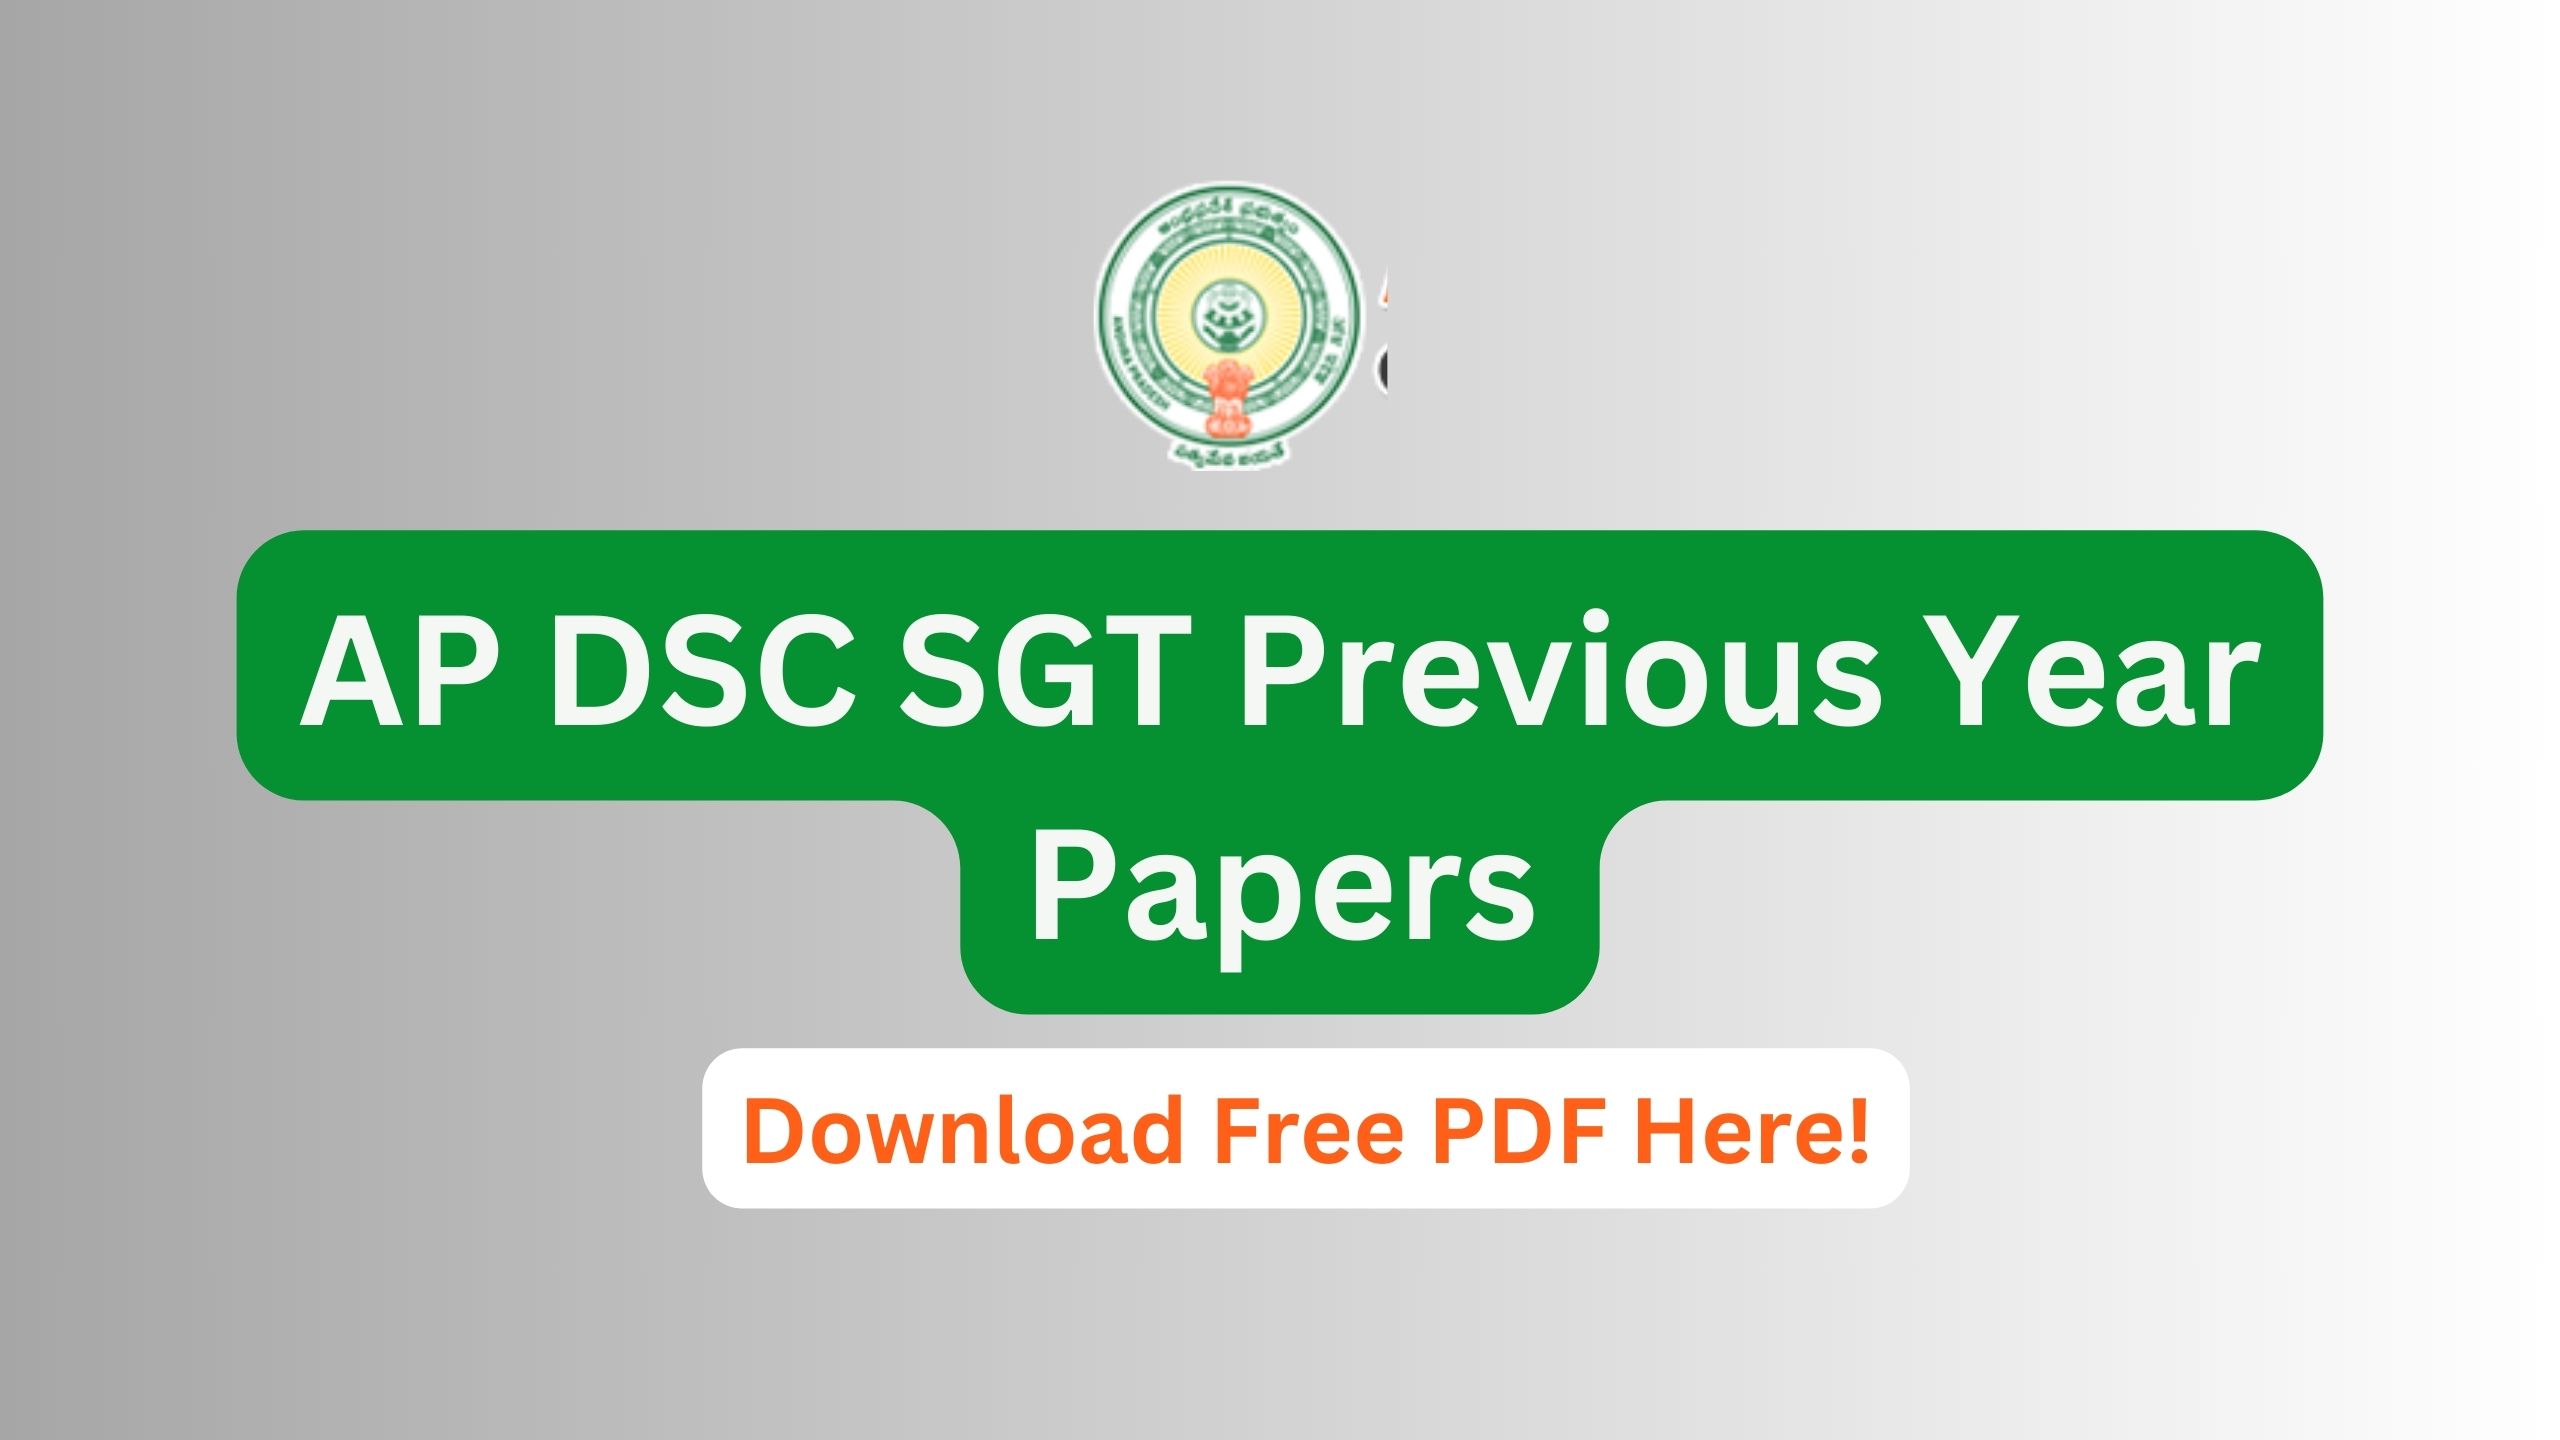 AP DSC SGT Previous Year Papers, Download 2019 Paper Here!